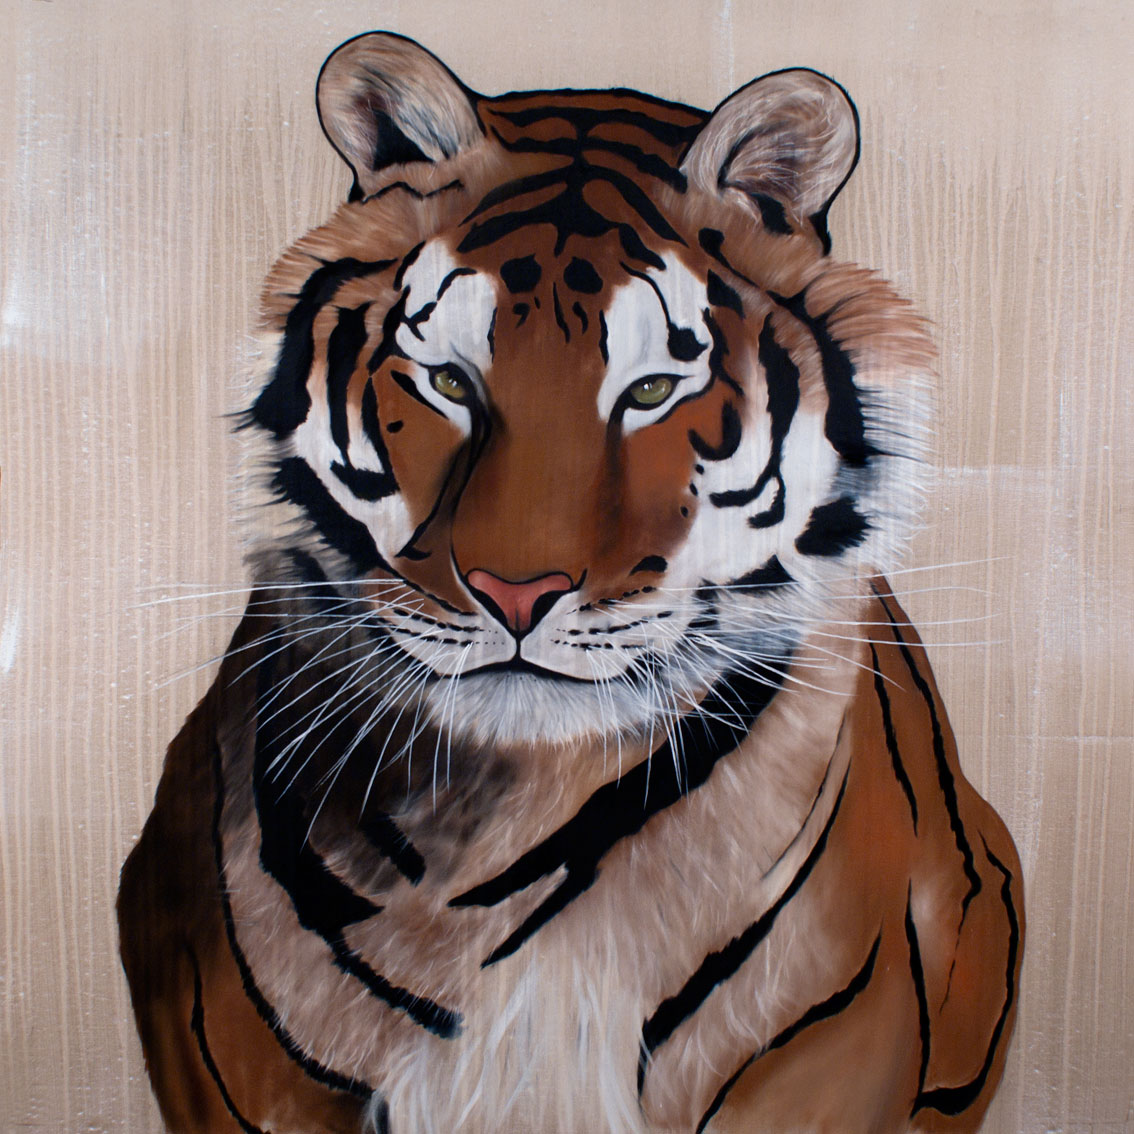 ROYAL TIGER tiger Thierry Bisch Contemporary painter animals painting art decoration nature biodiversity conservation